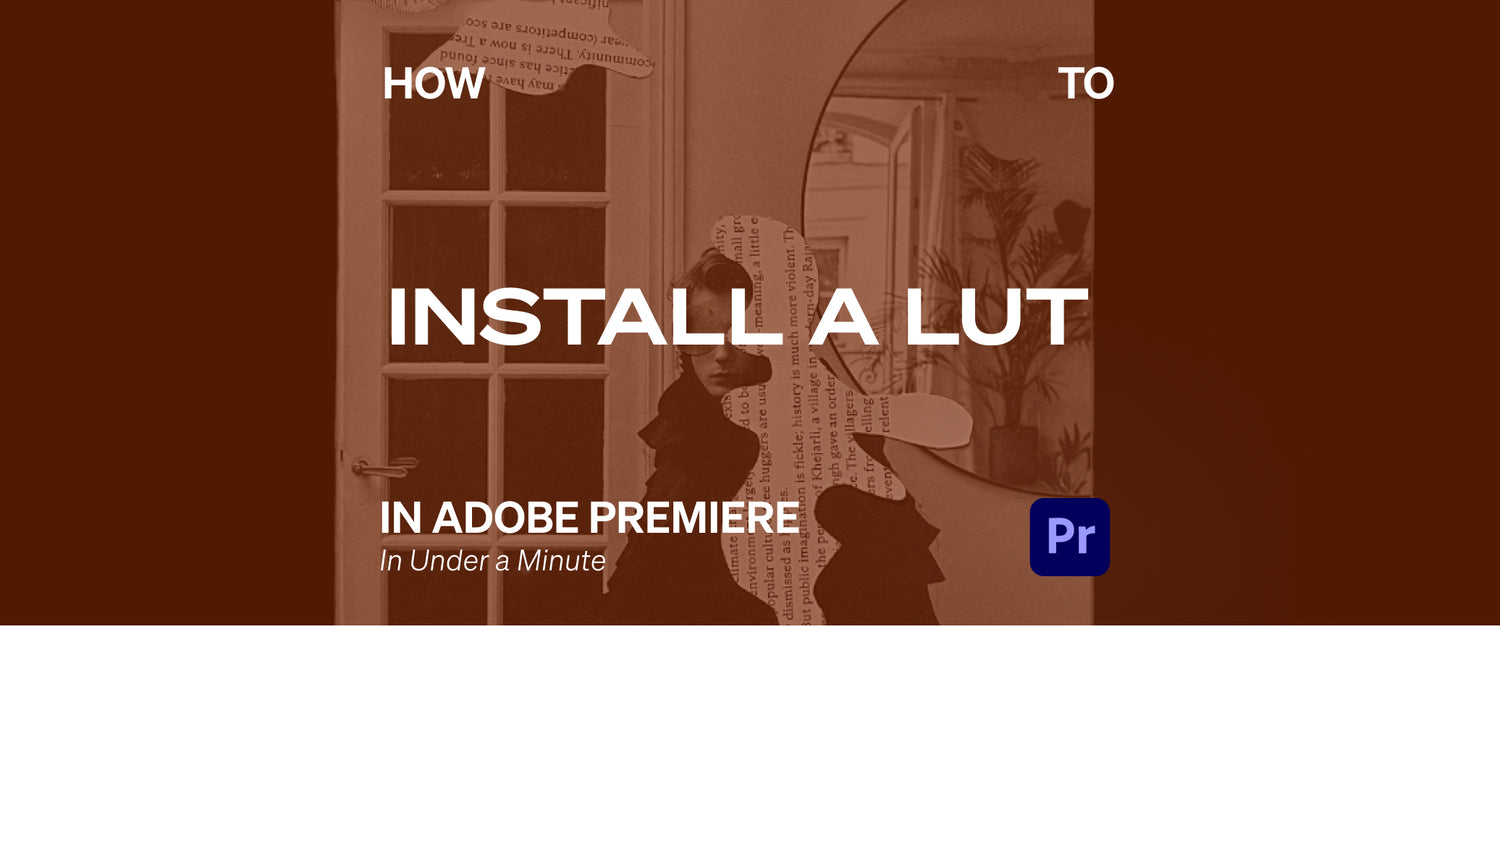 The Best Way to Install LUTs in Adobe Premiere